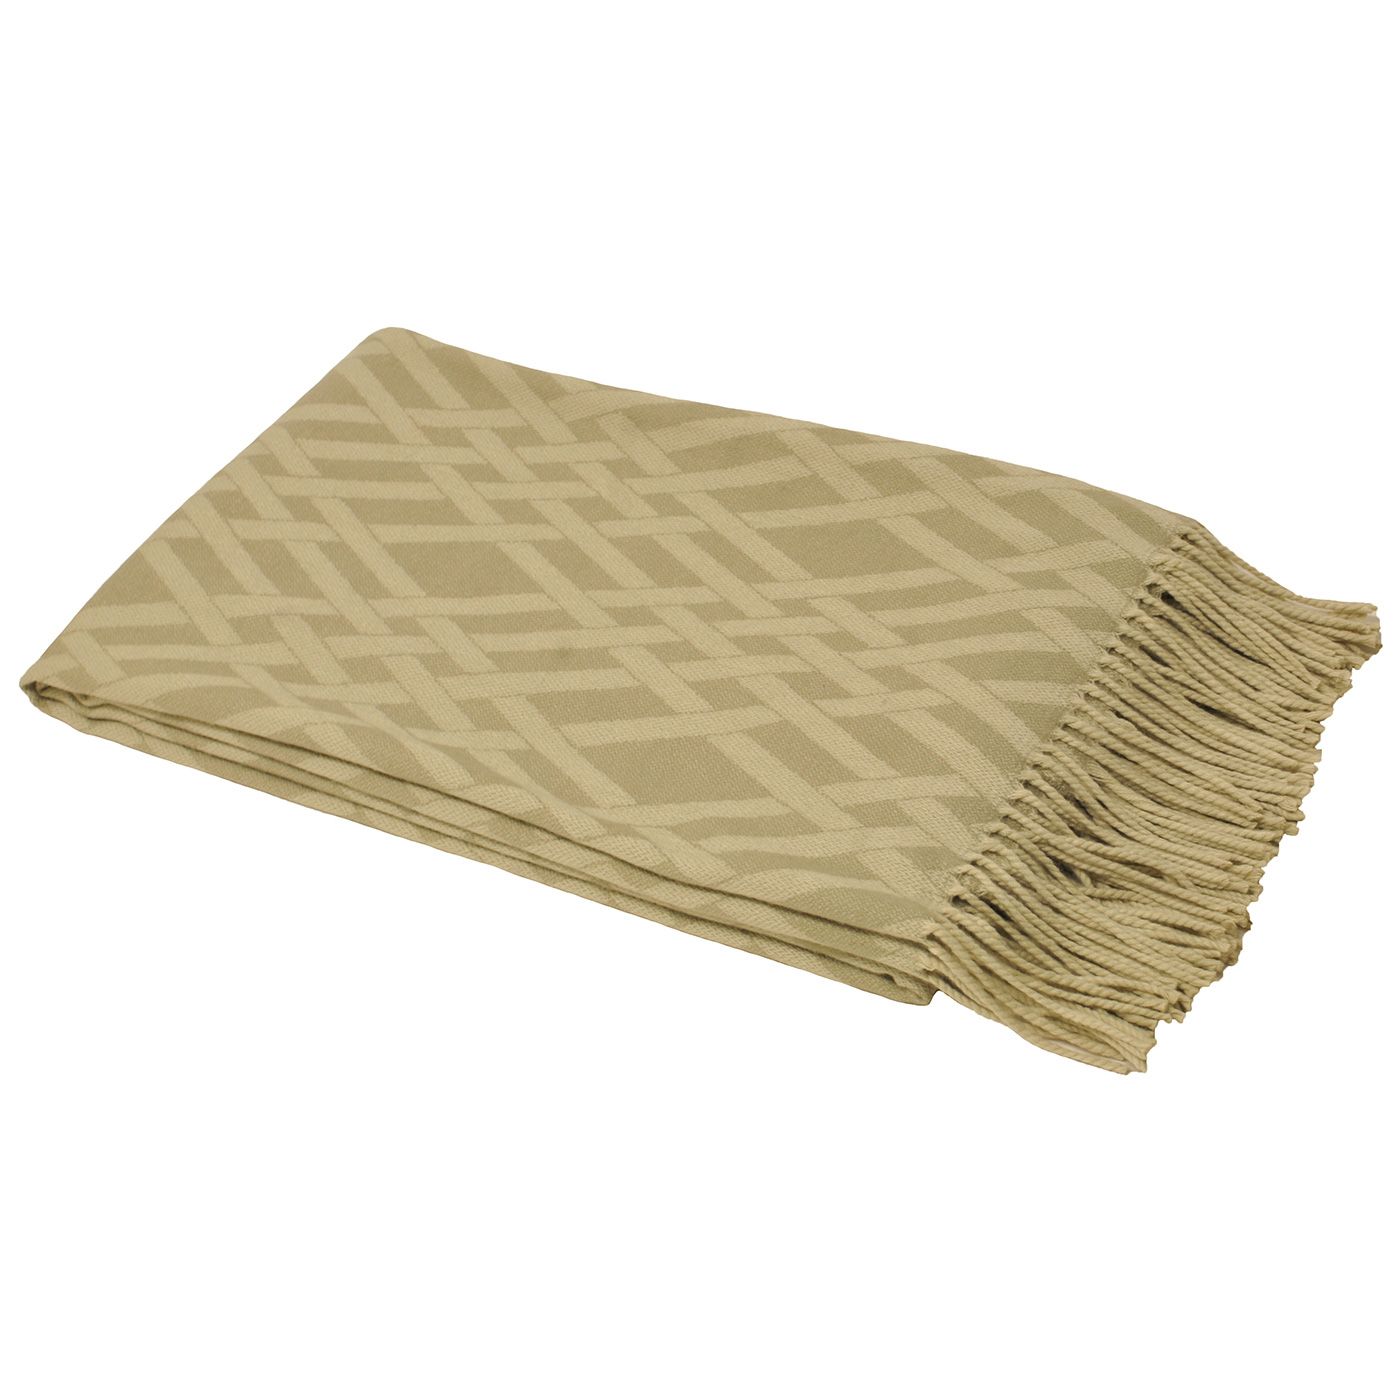 Stylish and soft the Paoletti Madison throw features a traditional geometric crisscross weave design in contrasting colour tones. Each heavyweight throw has twisted fringe edges allowing it to beautifully fall no matter where it is placed. Its neutral colourways allow it to assimilate flawlessly into most home interiors and will add a structured look to your home. Made of 100% acrylic this gorgeous throw is resistant to shrinkages and fading making it a hard-wearing piece able to withstand the everyday wear and tear of a busy household. This wonderful throw is hand wash only and should only be ironed on a cool setting.